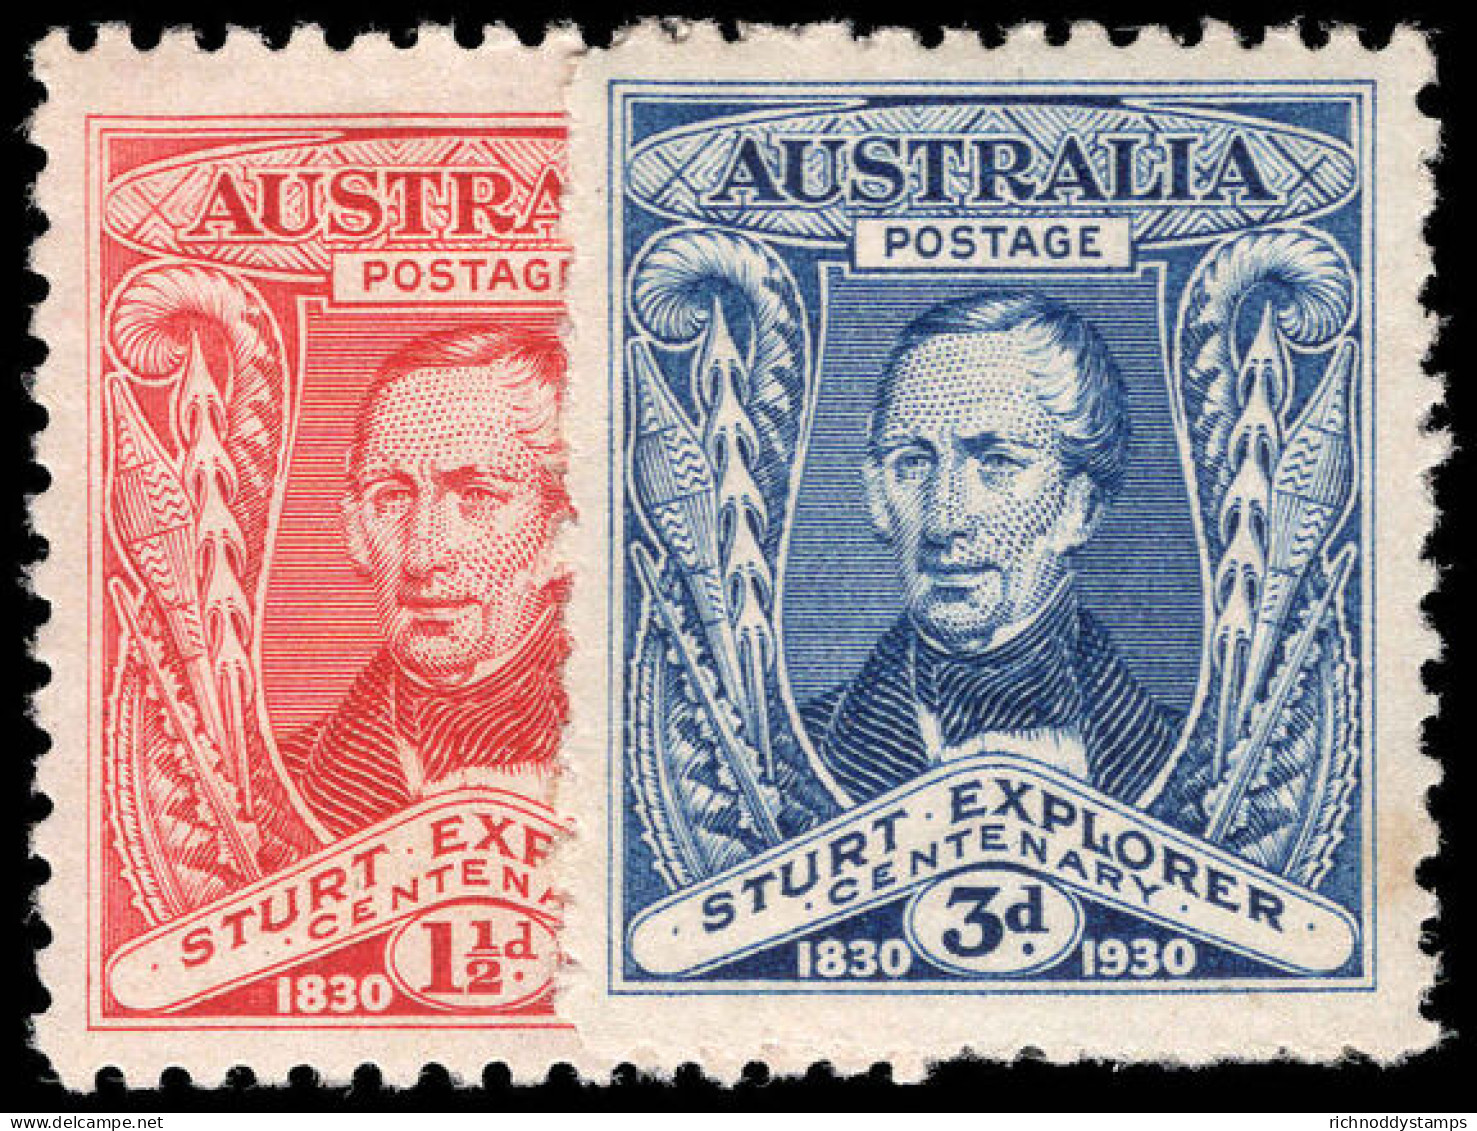 Australia 1930 Centenary Of Sturt's Exploration Of River Murray Lightly Mounted Mint. - Mint Stamps